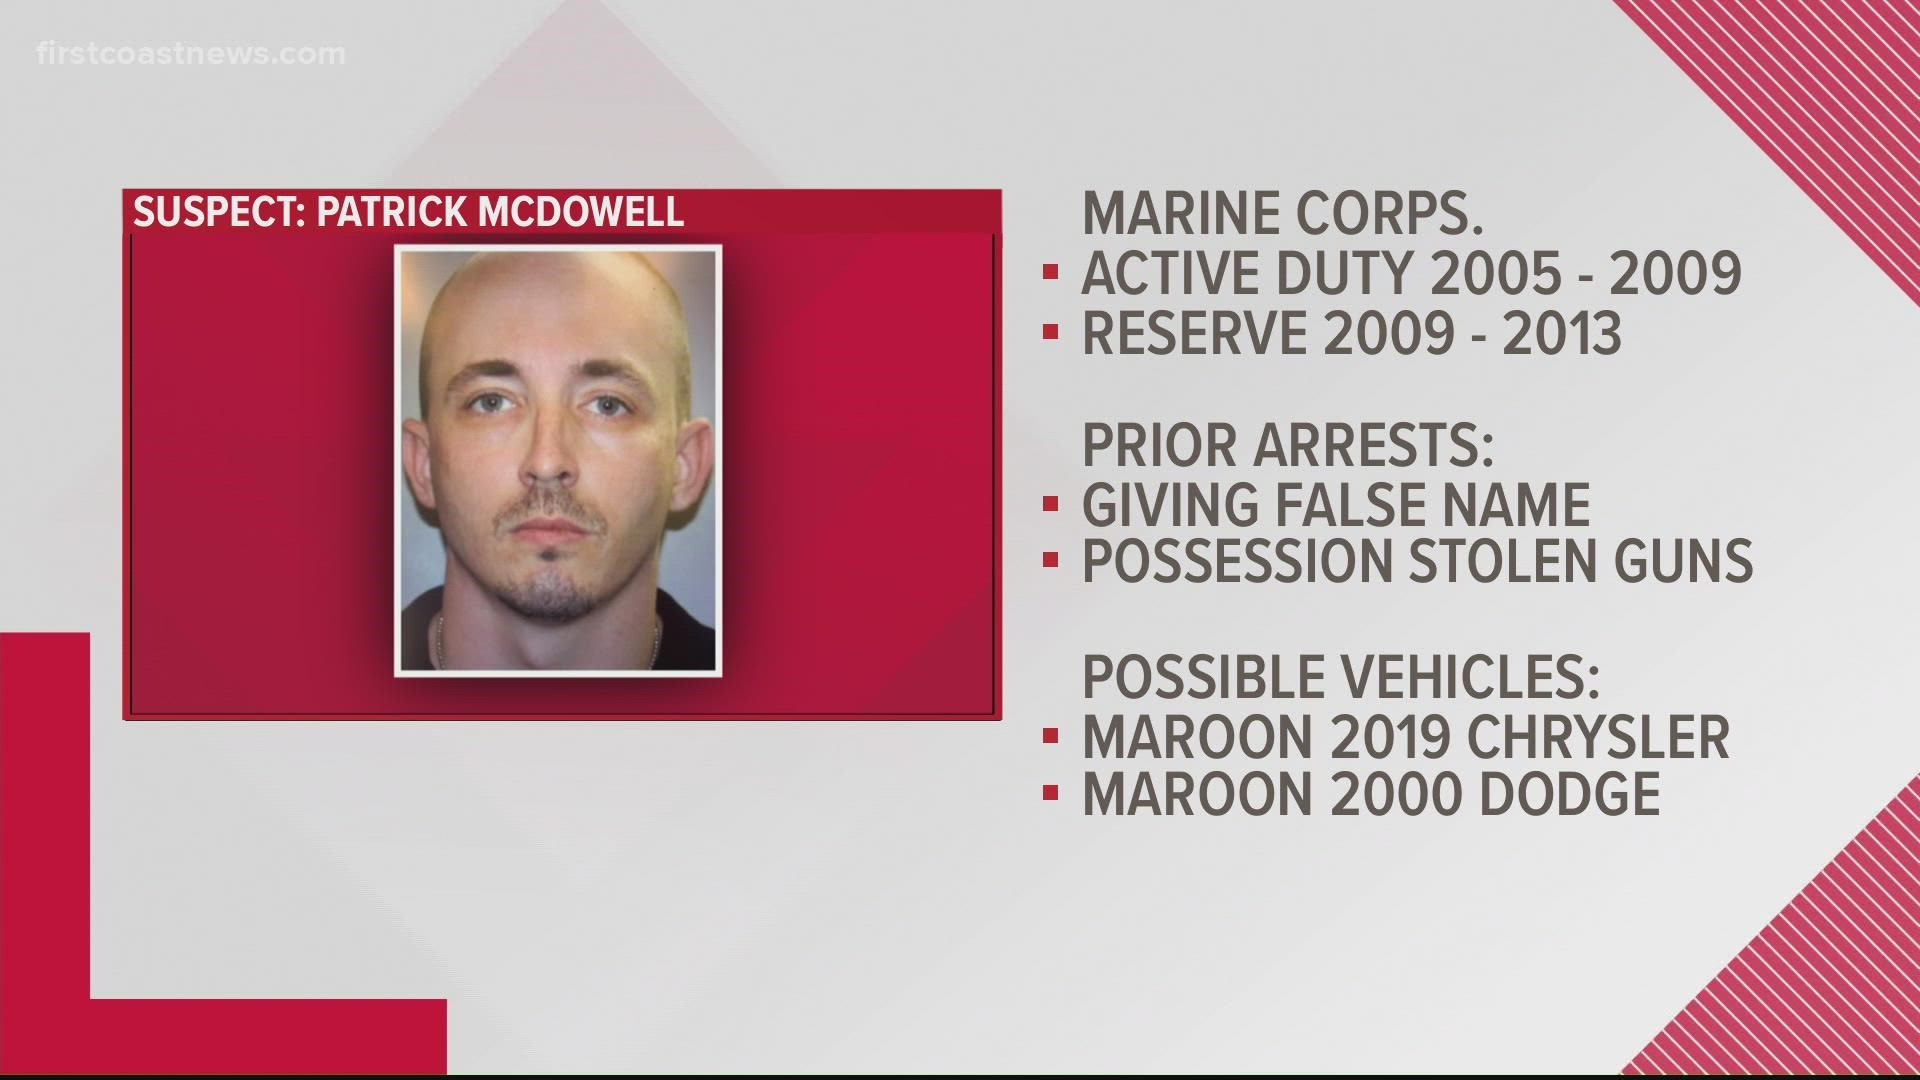 Patrick McDowell participated in shooting competitions in 2014, according to the Nassau County Sheriff's Office.